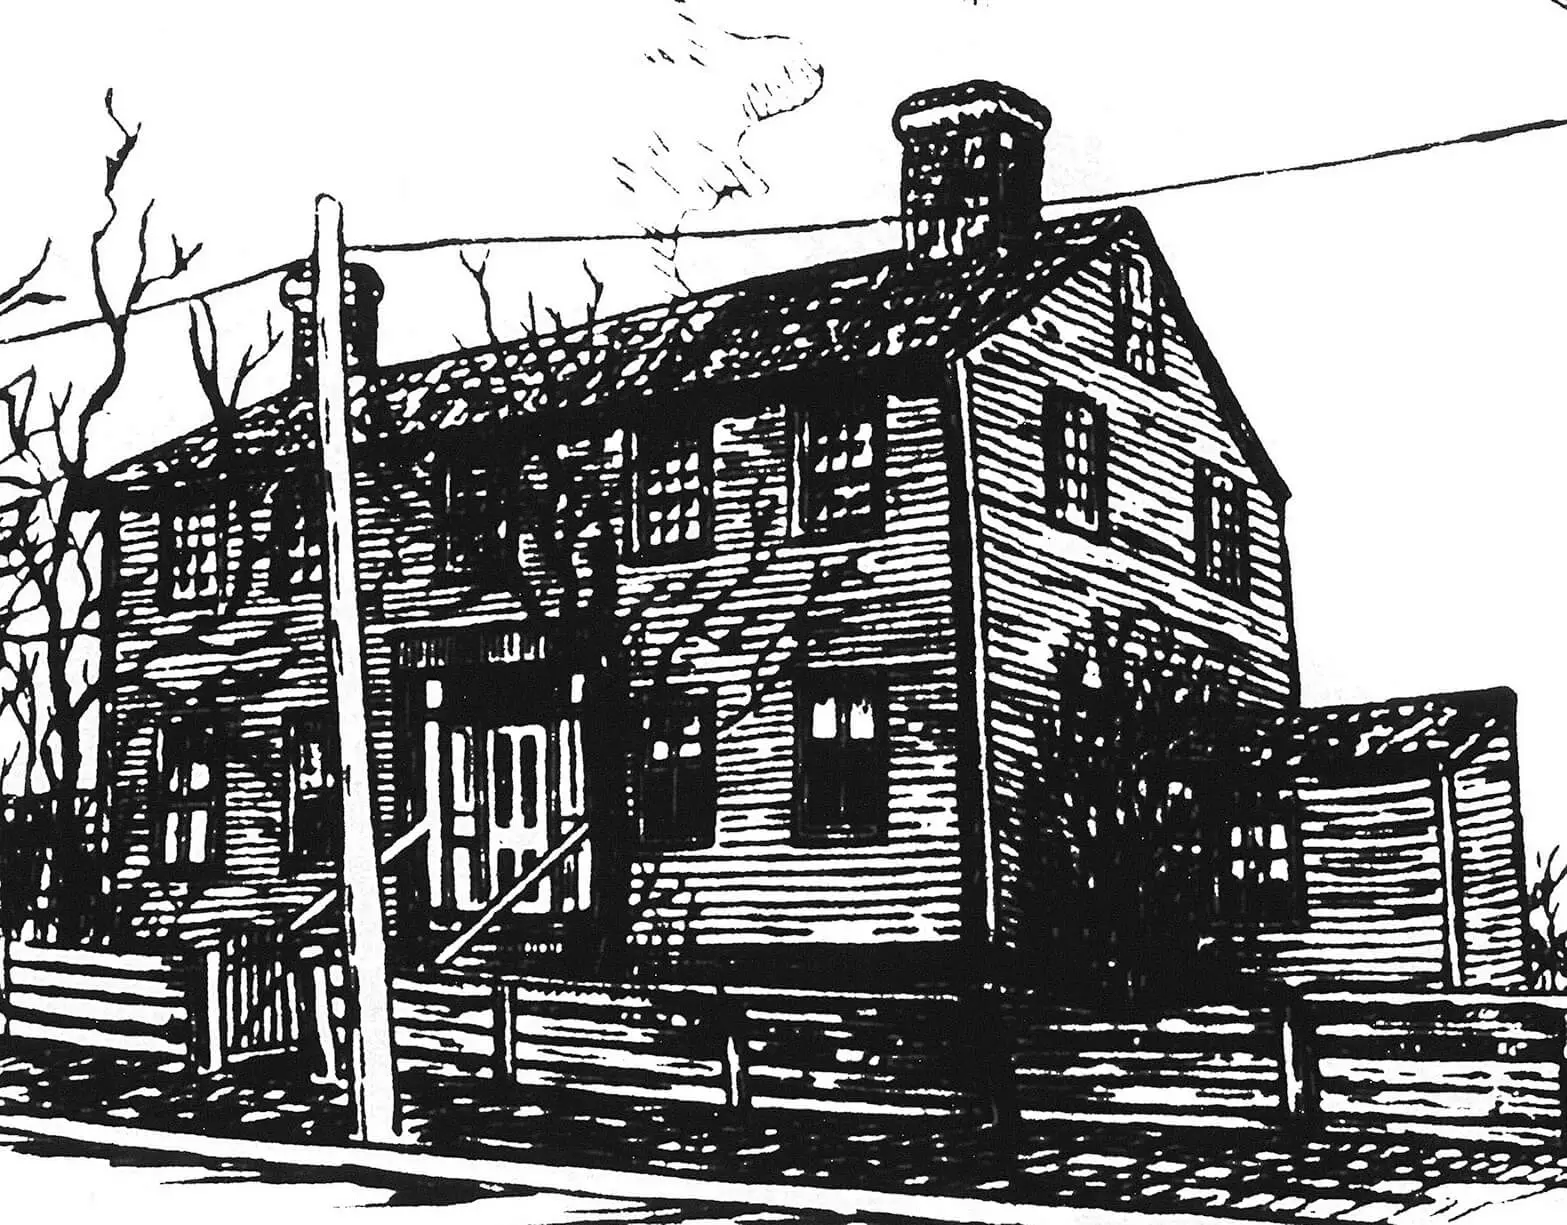 Illustration of a simple two-story framed home